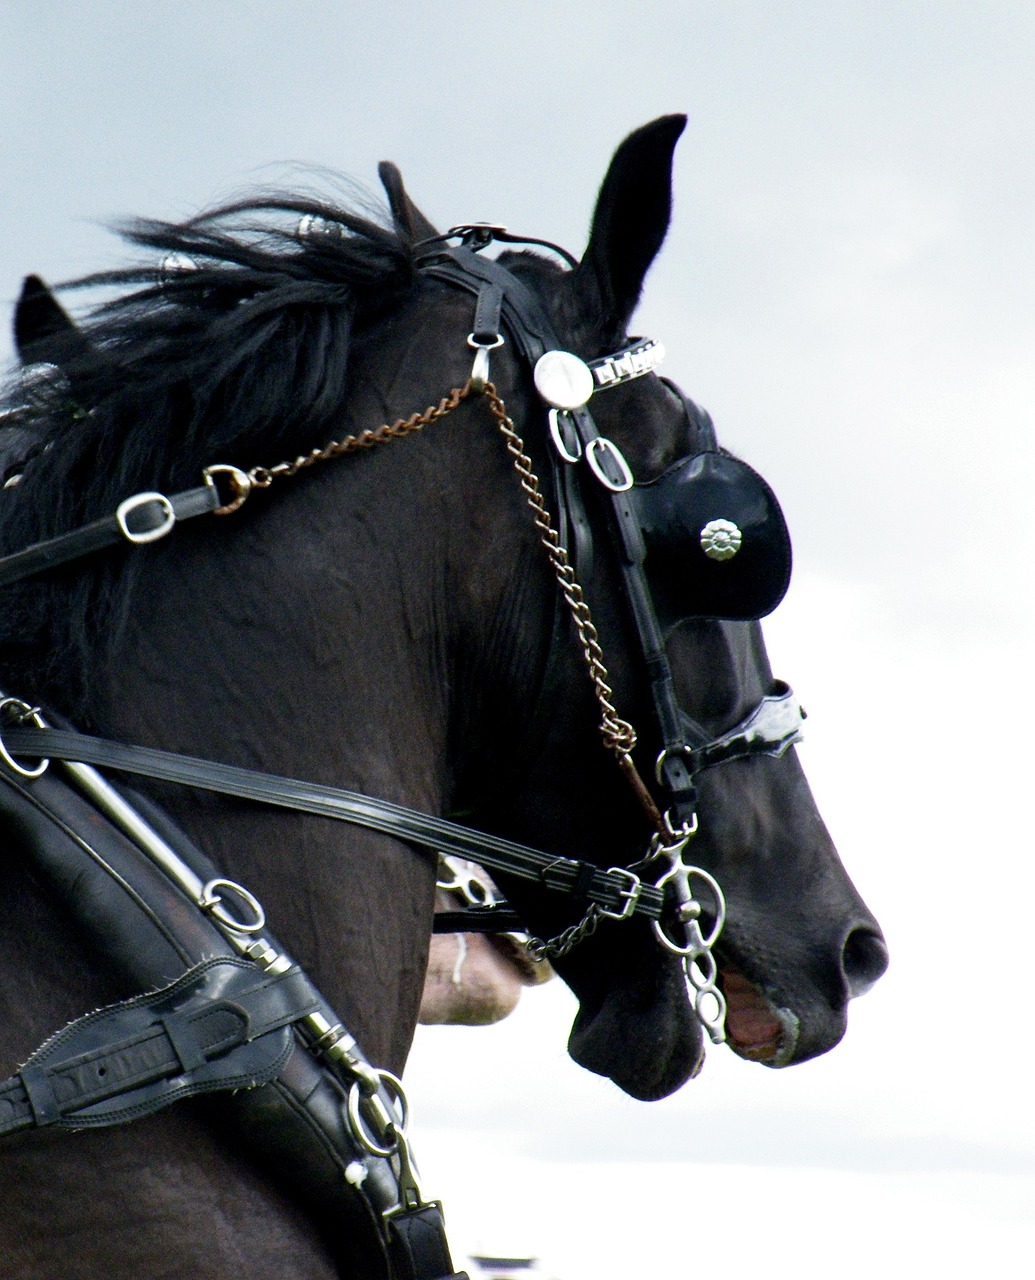 a close up of a horse wearing a bridle, by Carol Sutton, flickr, carriages with horses, black horns, steampank style, taken with a pentax1000